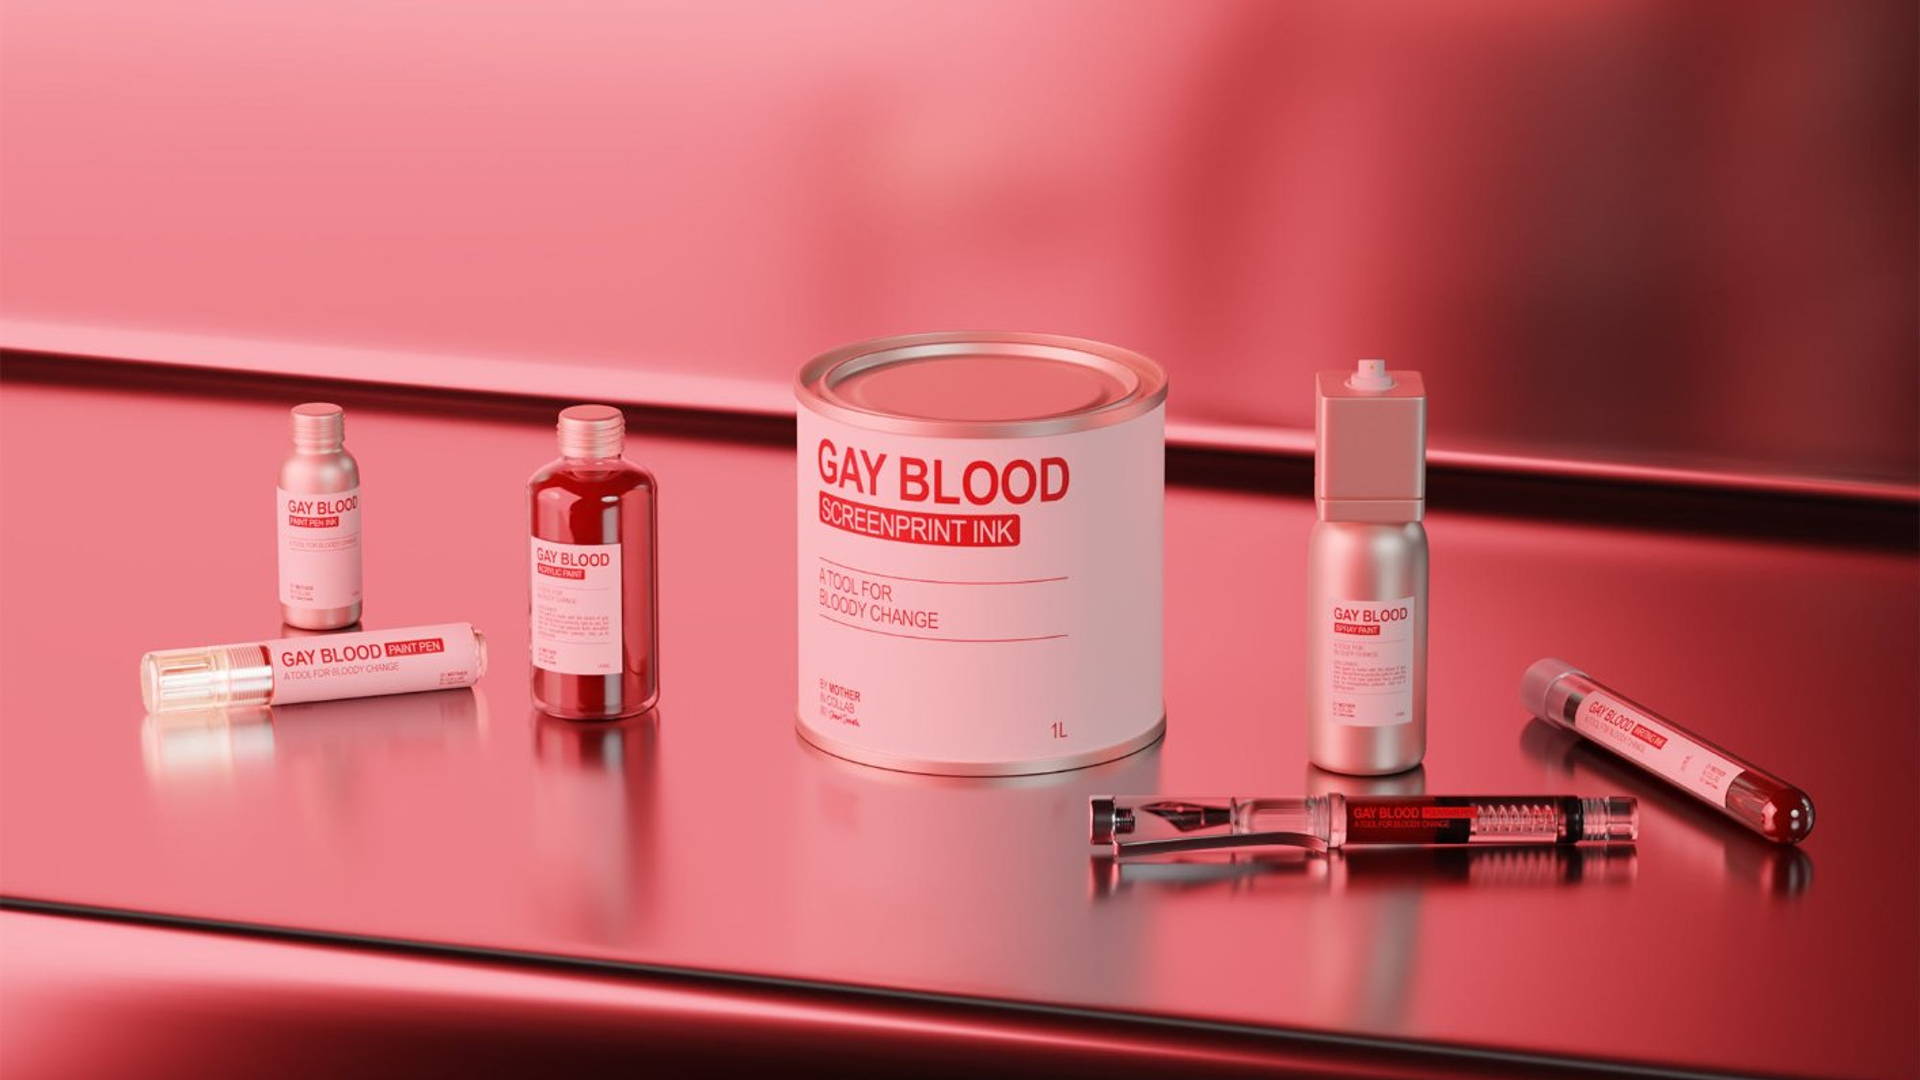 Featured image for Mother and Stuart Semple's Latest Project Brings Attention To FDA Ban On Gay Blood